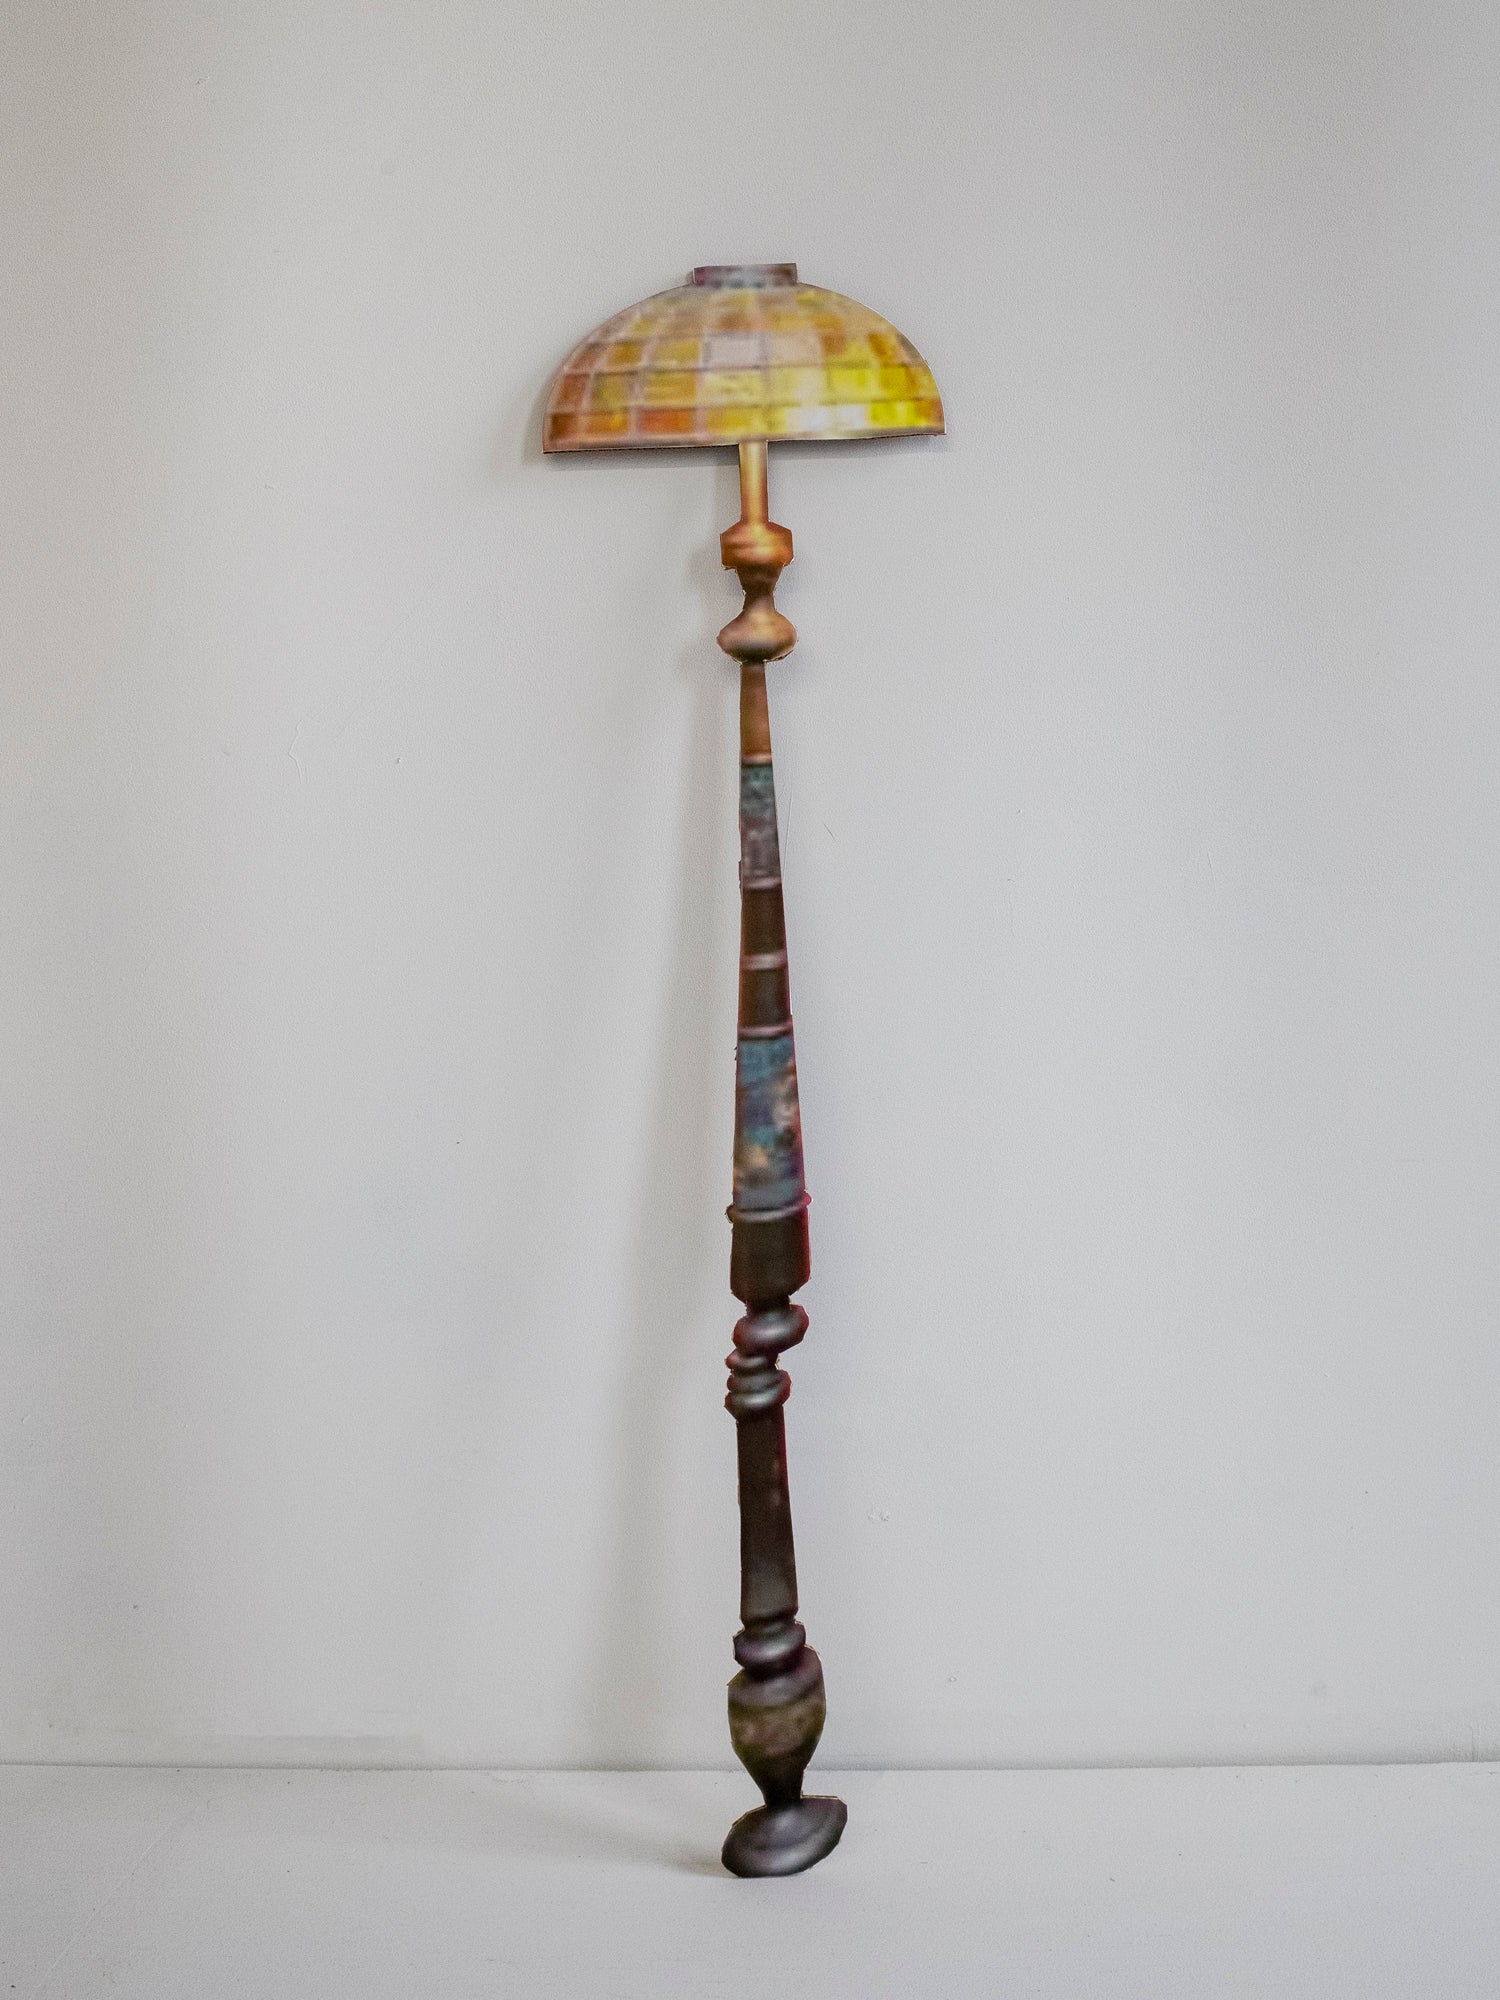 Unhee Park, "Stained Glass Lamp"